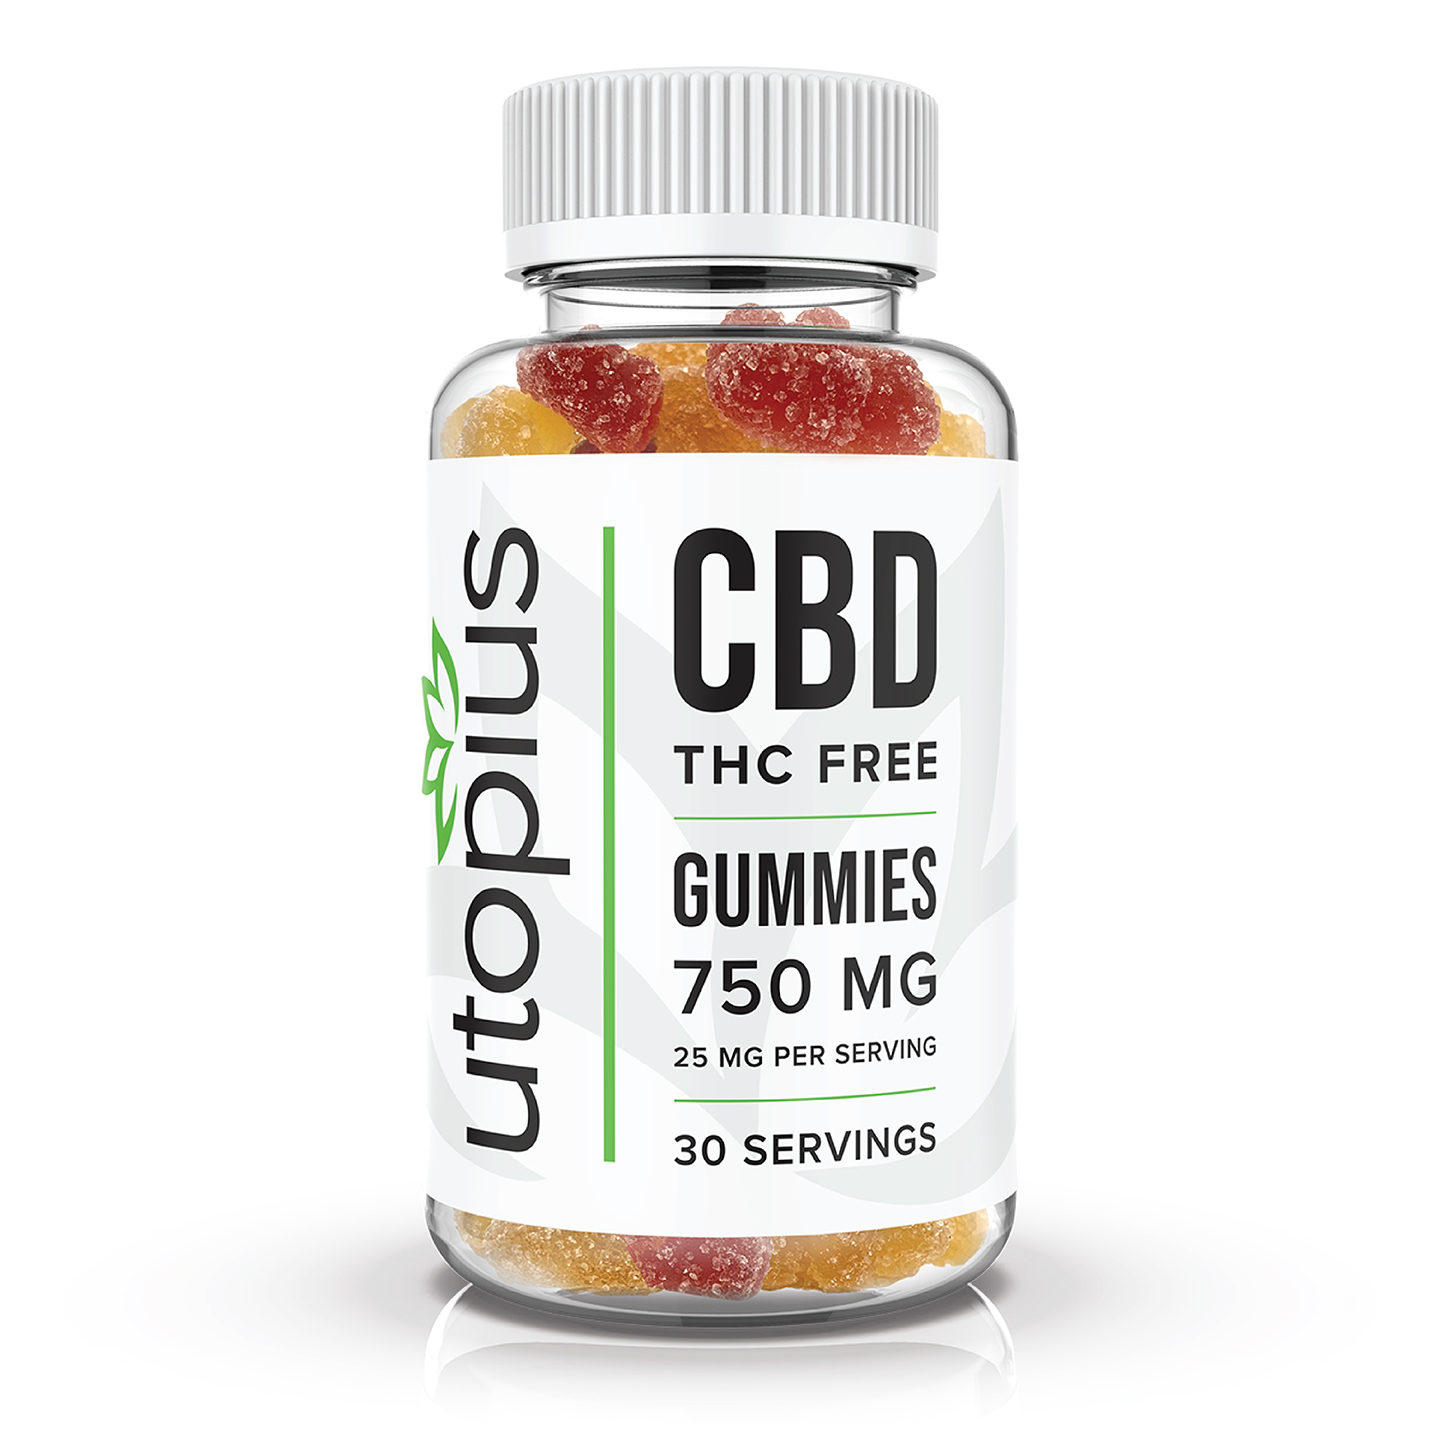 How To Choose The Right Strength And Dosage Of CBD Gummies For Sleep